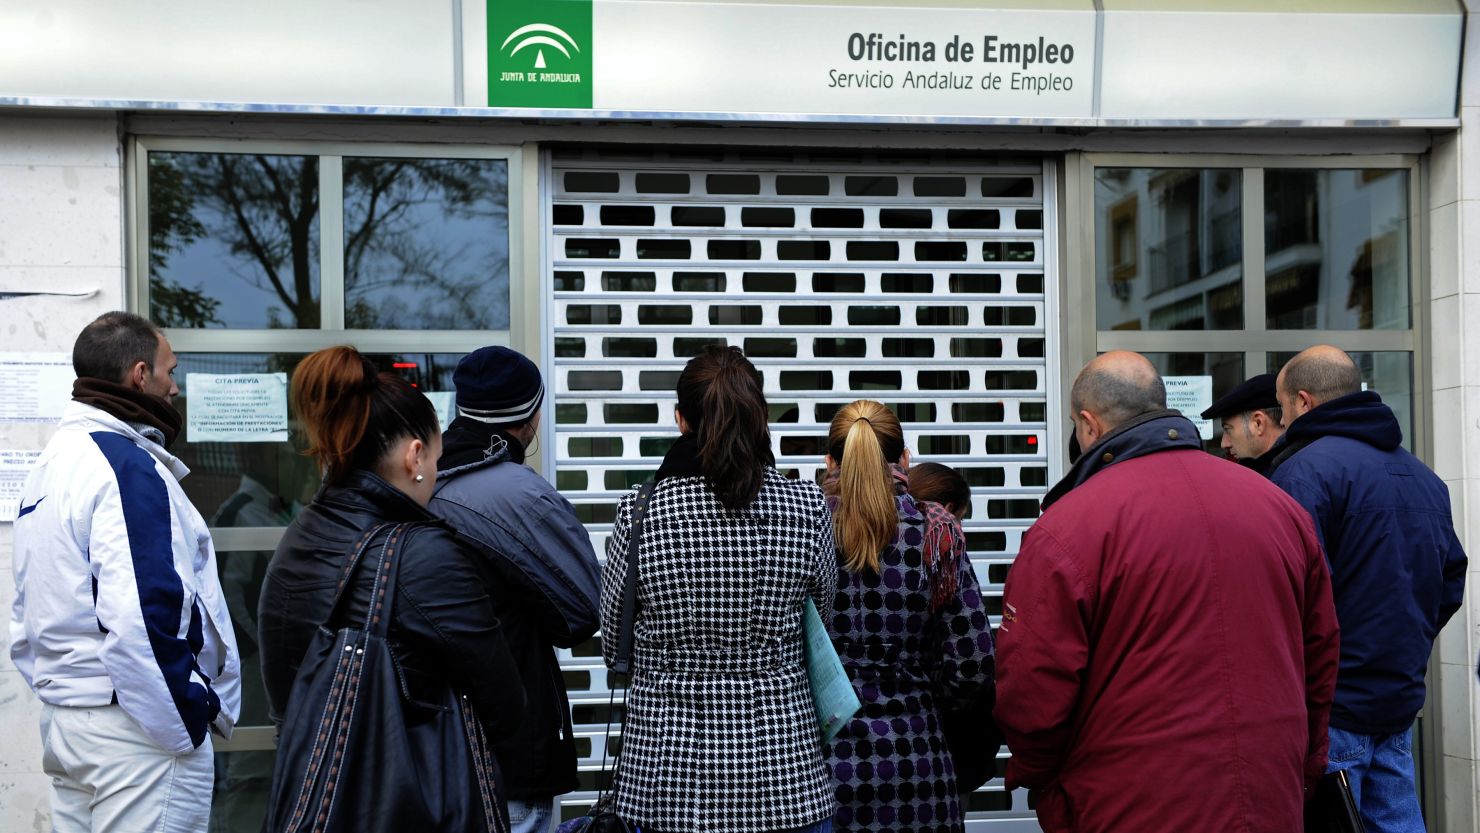 People wait in line in front of a government employment office in Sevilla, Spain, on Friday.